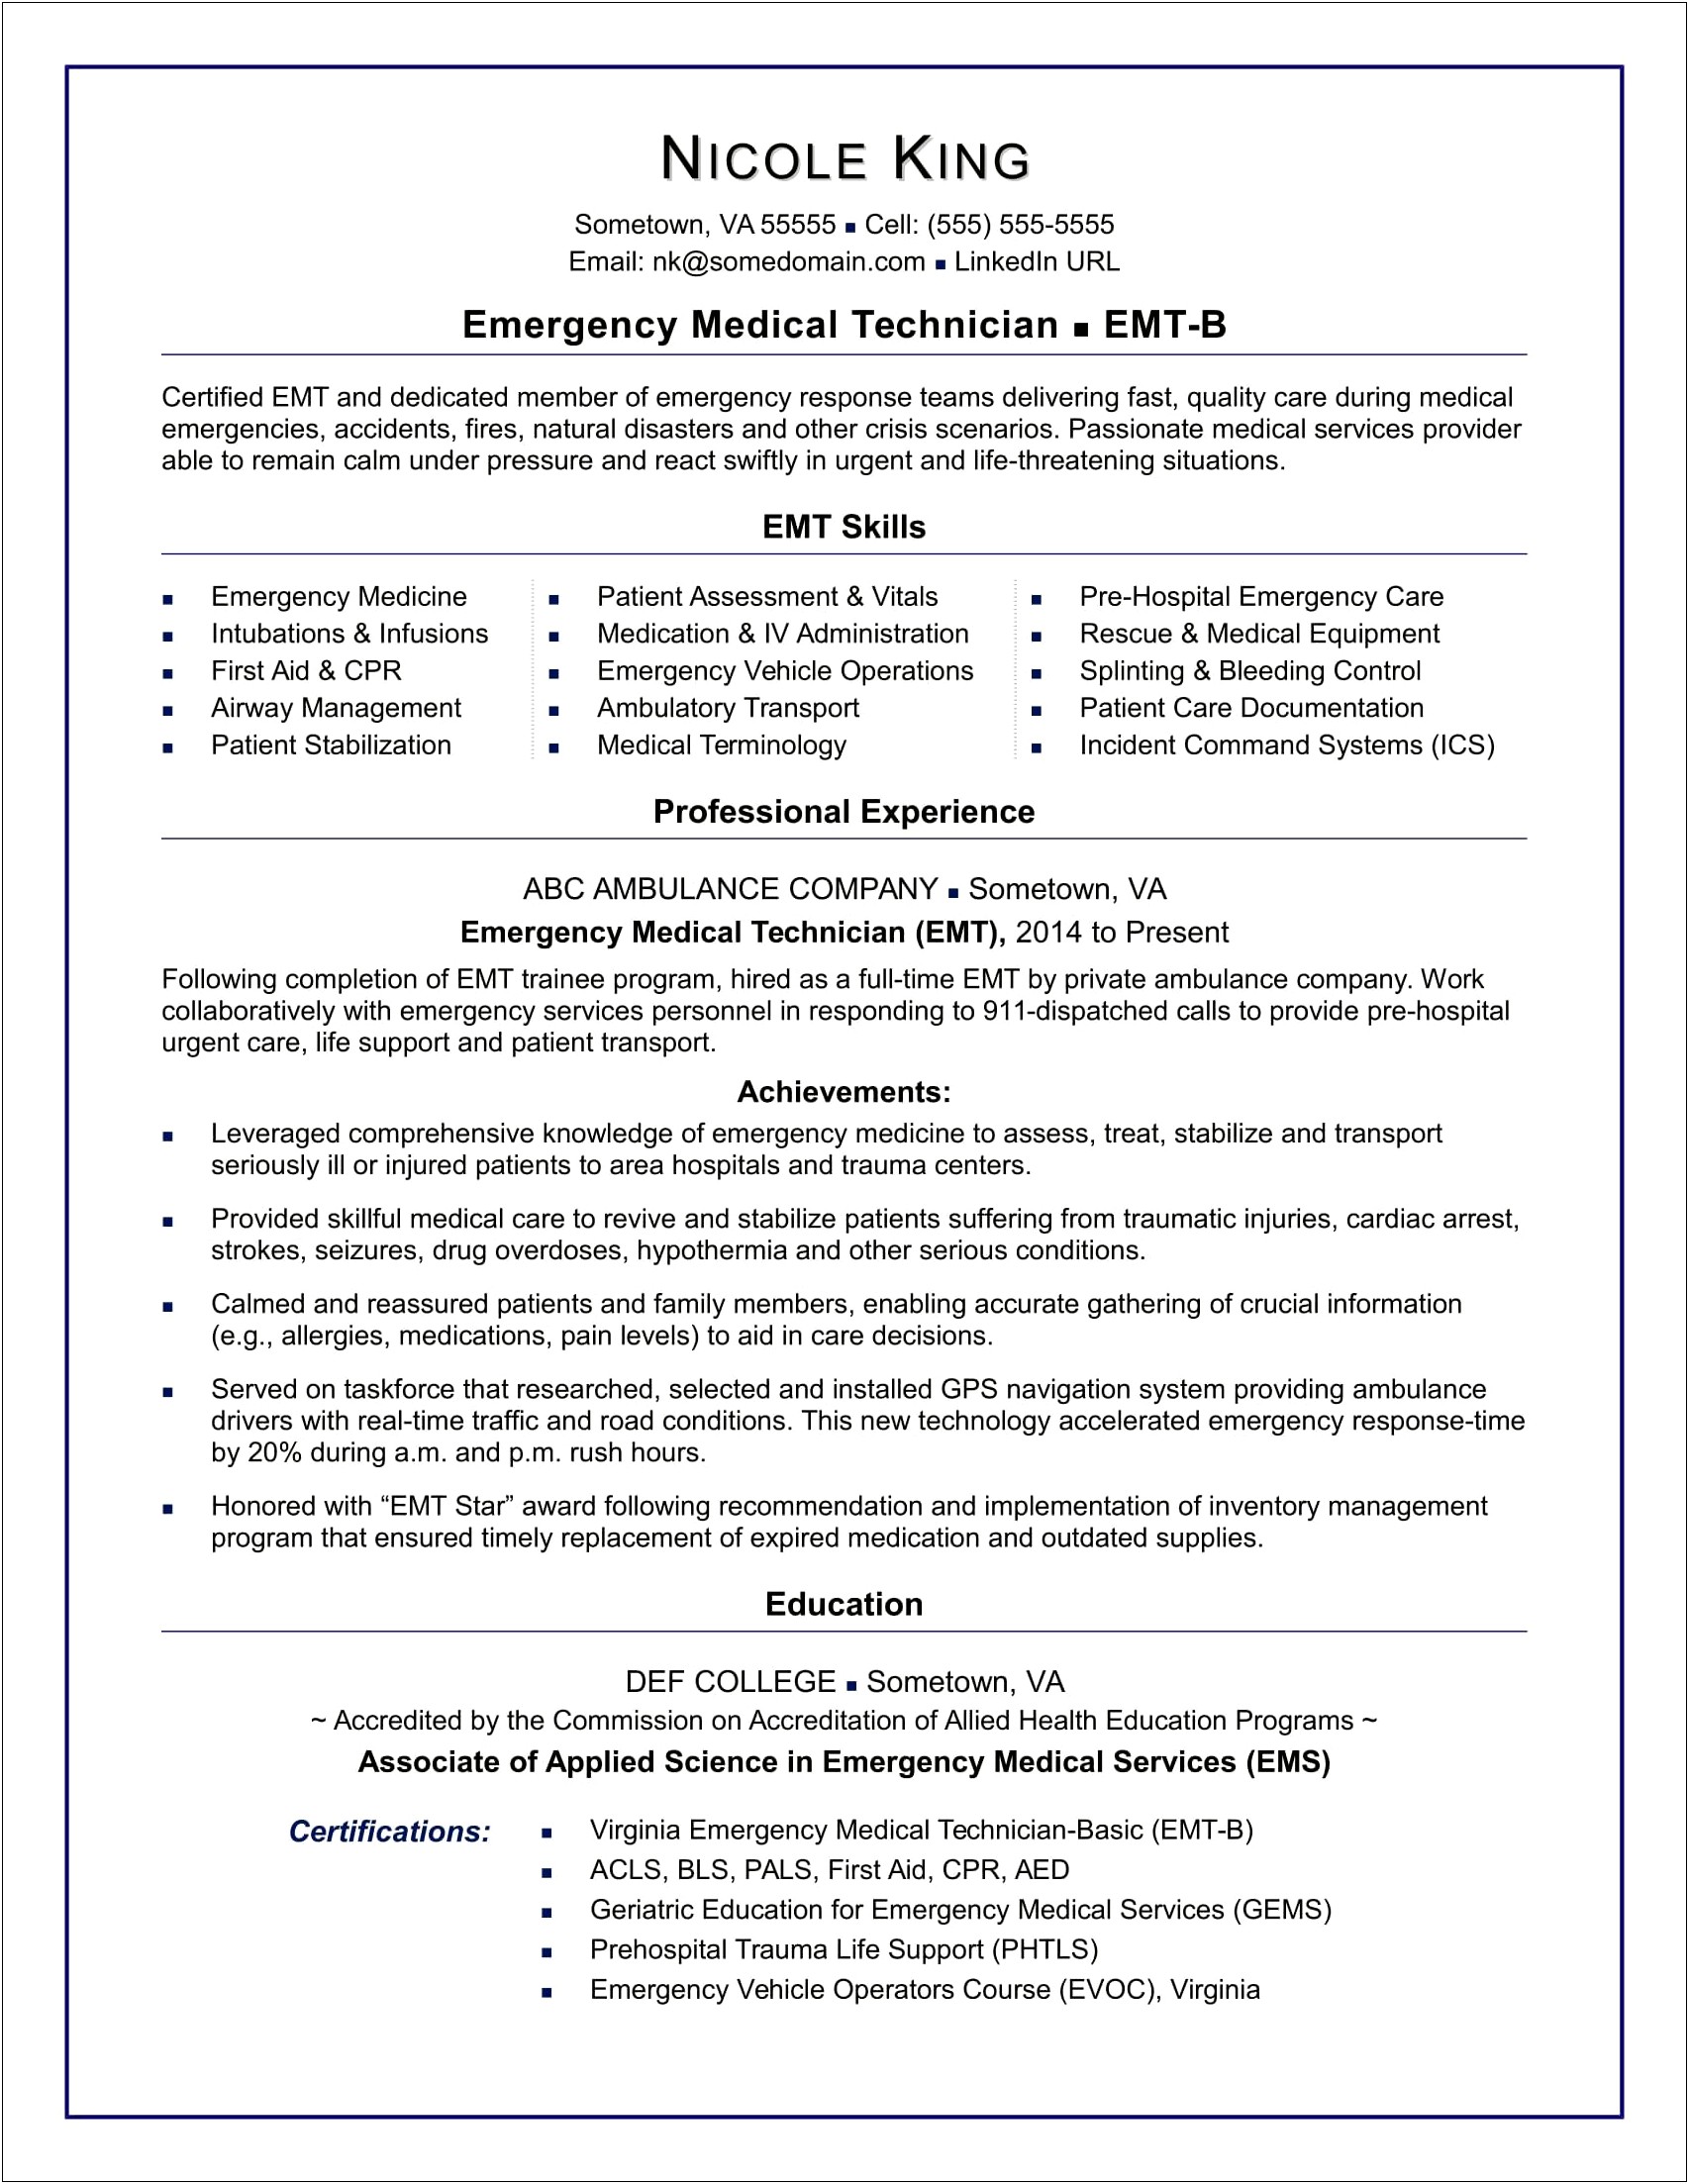 Managed Service Provider It Support Resume